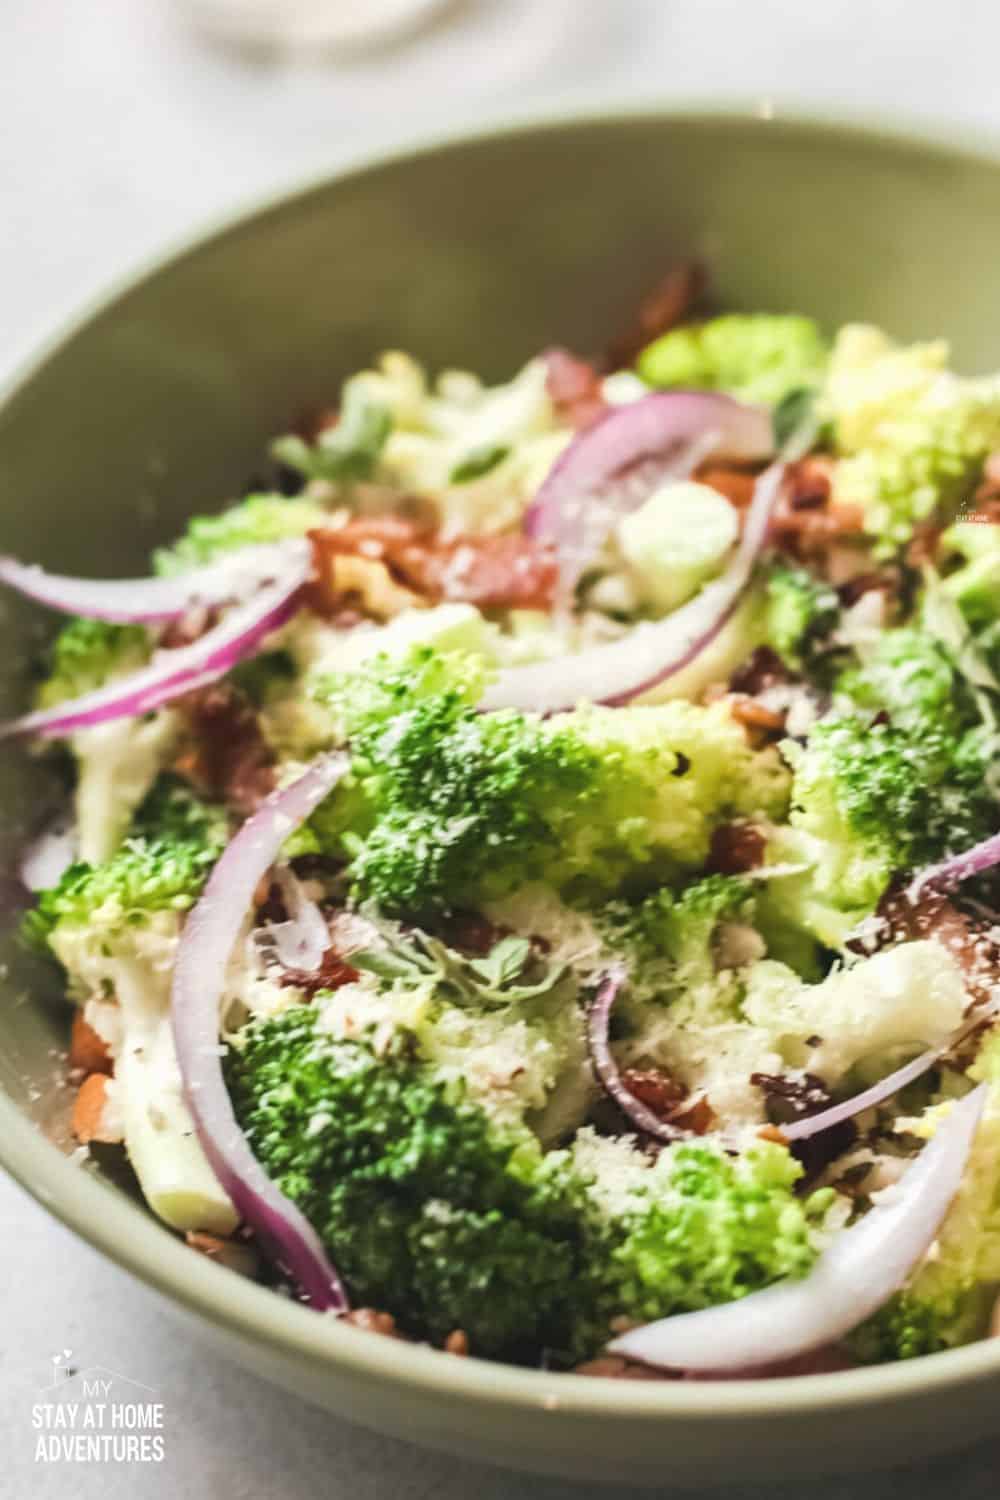 Discover the perfect balance of flavors and textures in a broccoli salad, and try our delicious Keto Broccoli Salad Recipe for a healthy, low-carb twist on this classic dish. via @mystayathome